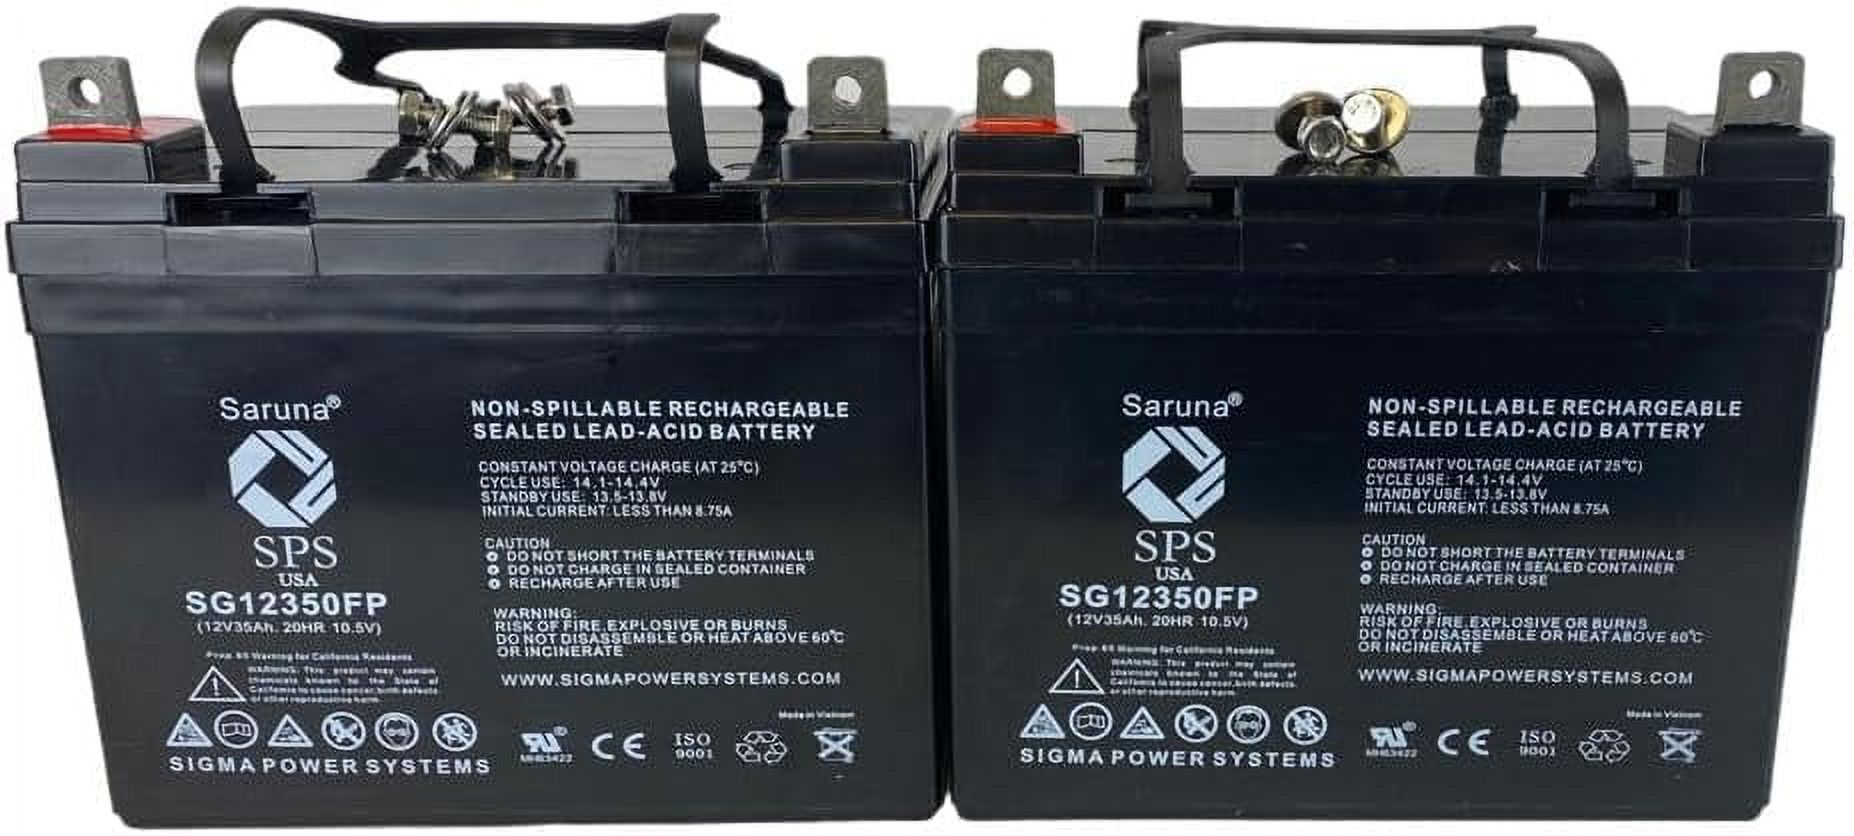 SPS Brand 12V 35Ah Replacement battery (SG12350) for Lawn Mower Universal Power Group Battery UB12330 ( 2 PACK) - image 1 of 1